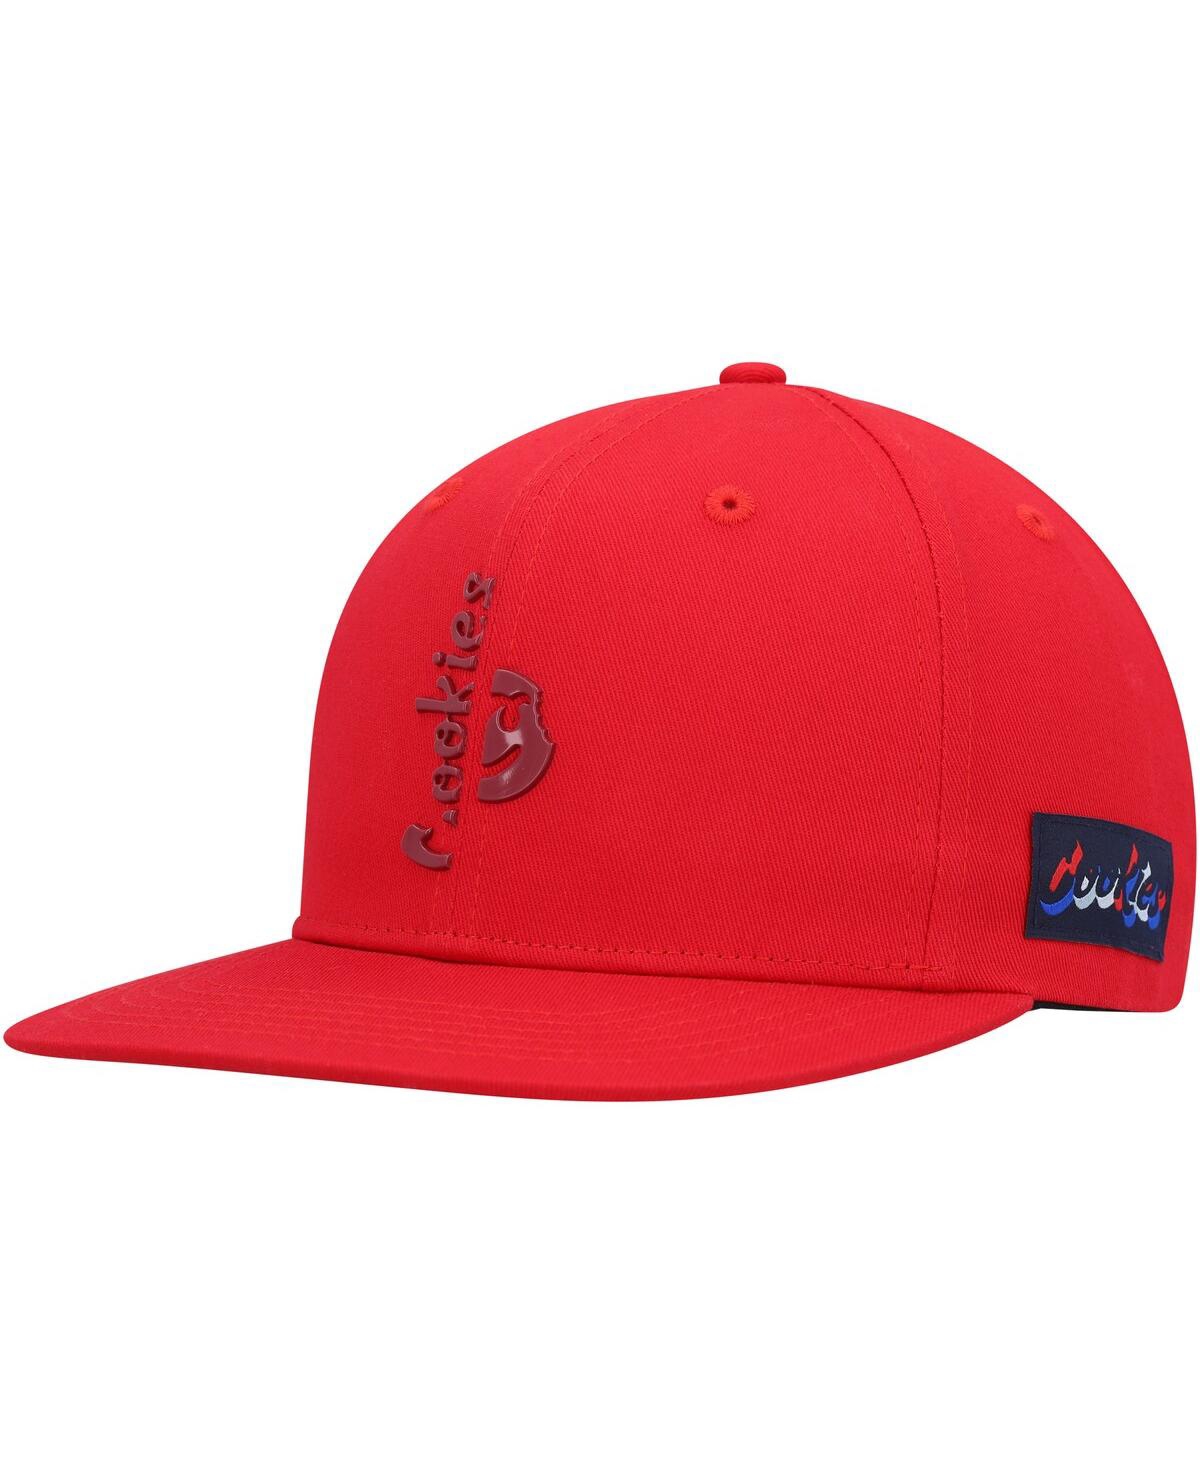 Men's Cookies Red Searchlight Snapback Hat - Red